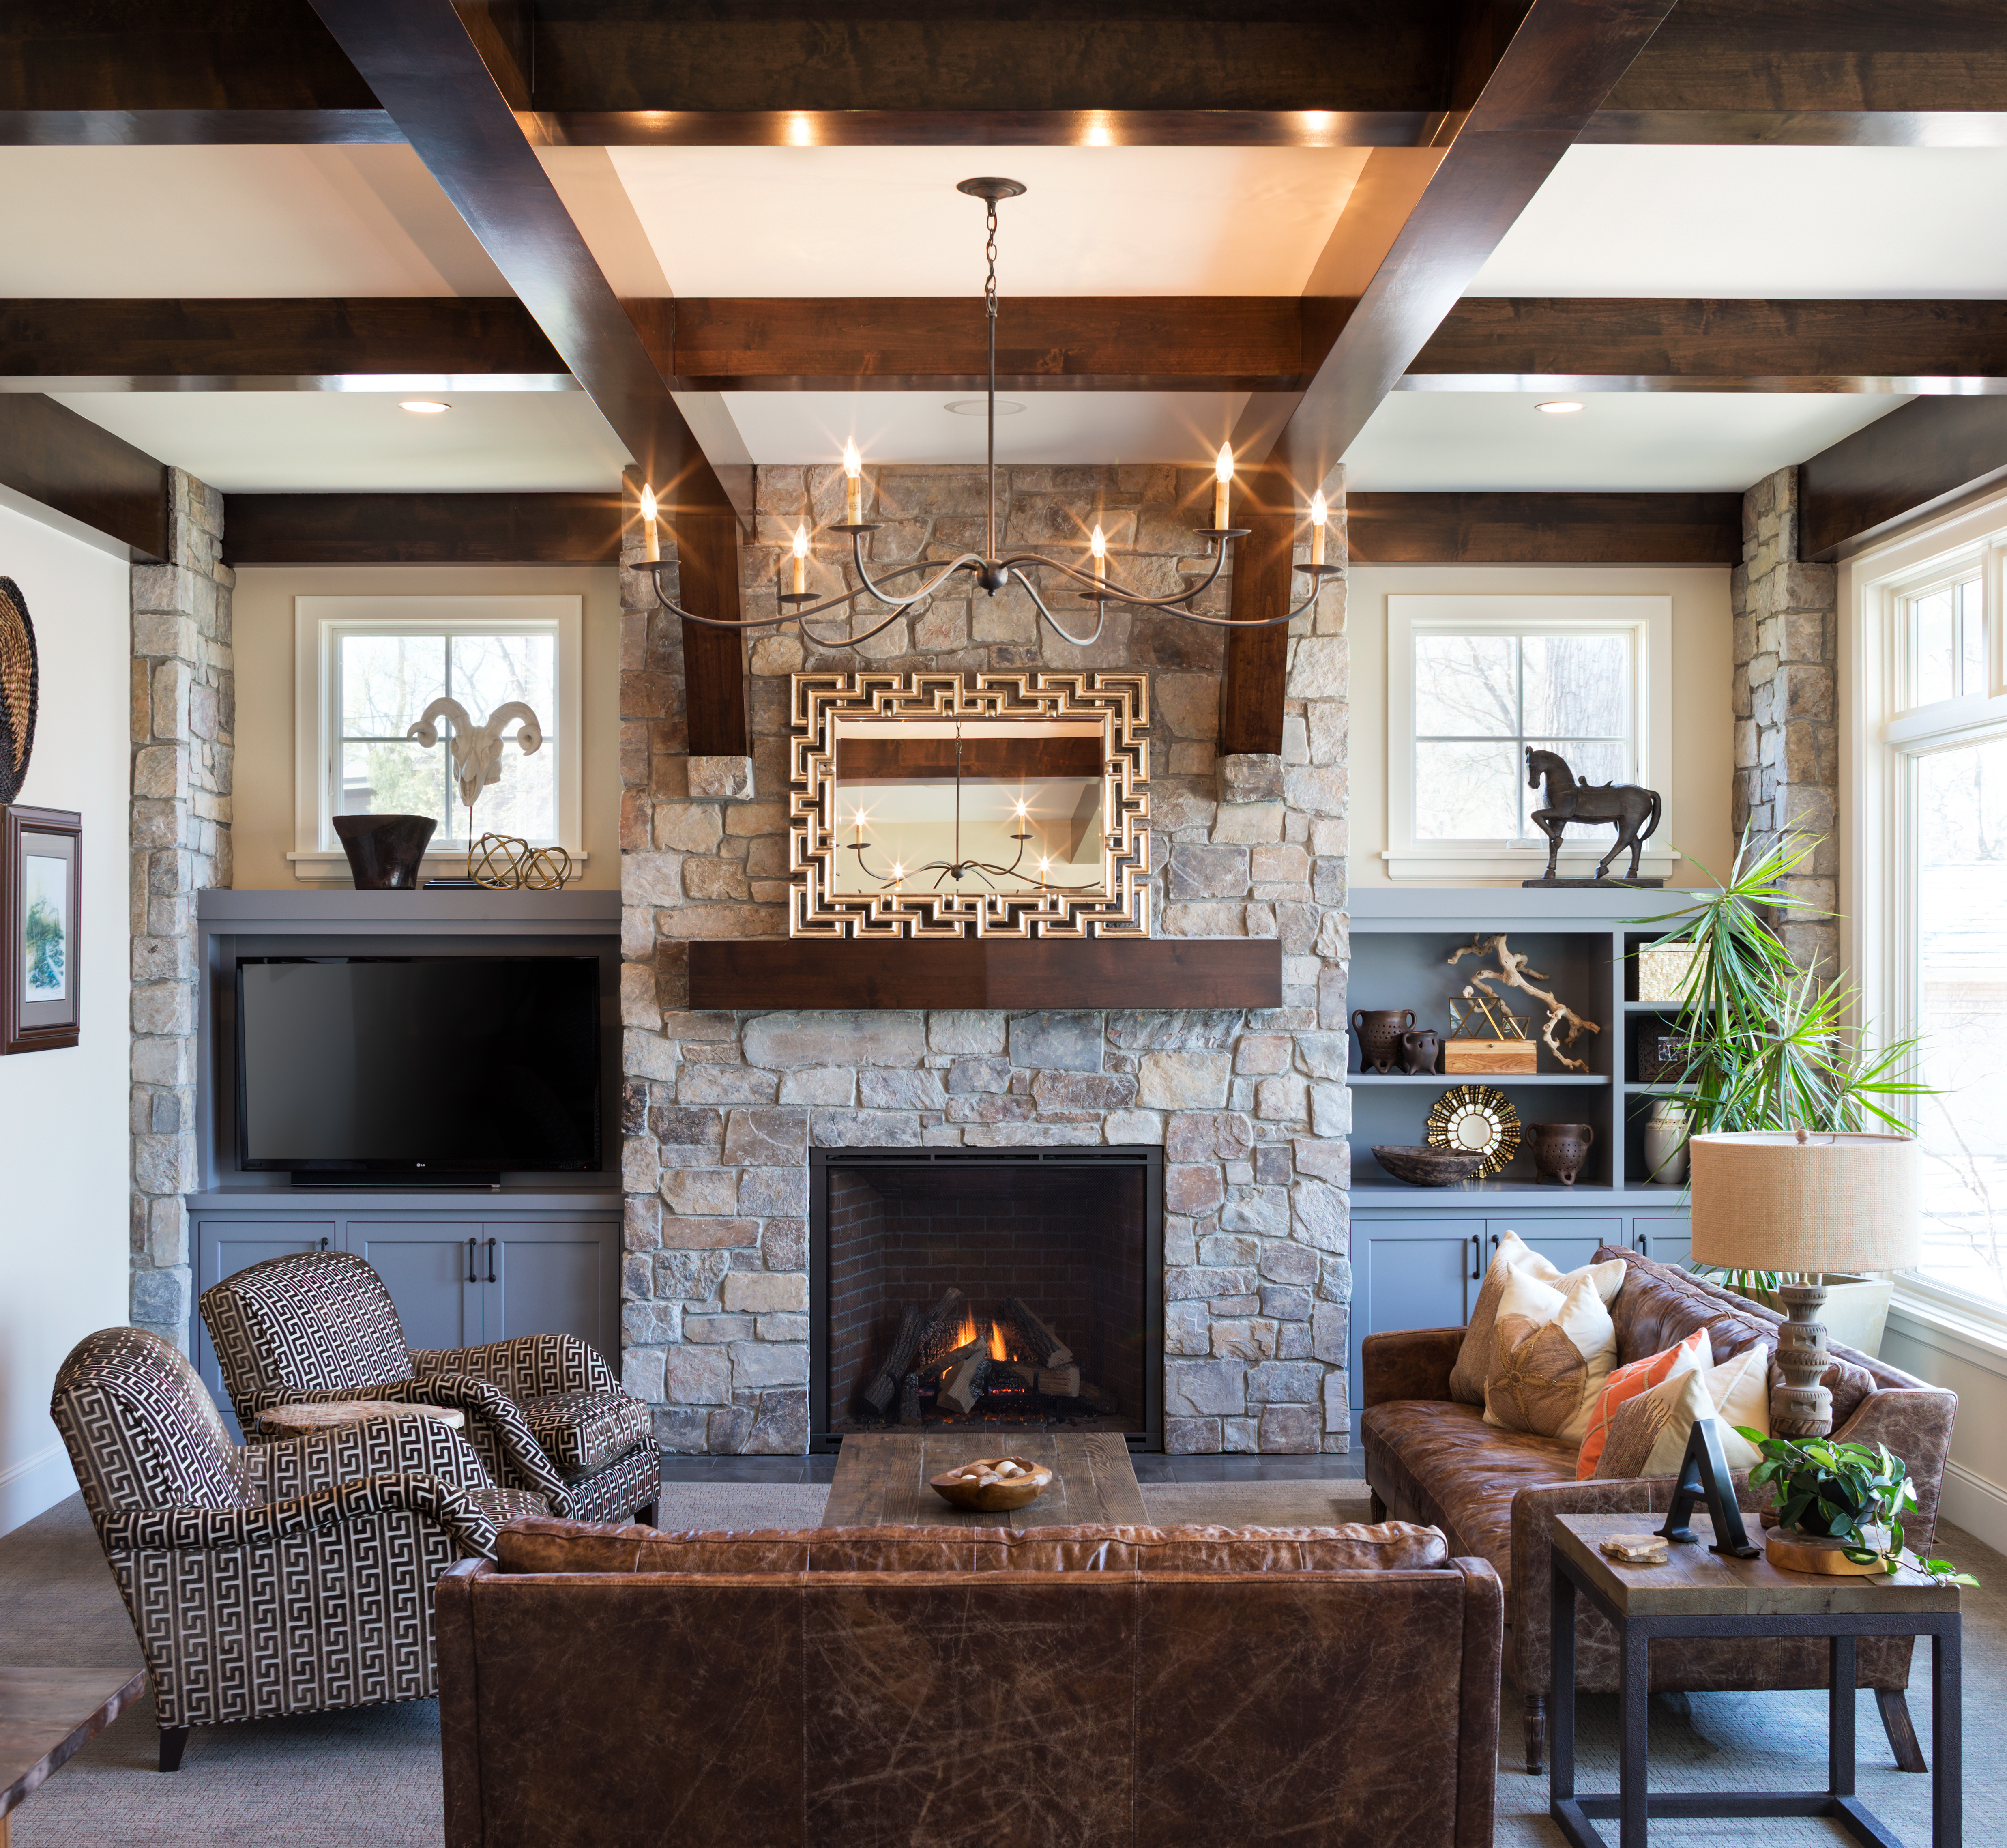 Image for Facts About the 2015 Artisan Home Tour by Parade of Homes